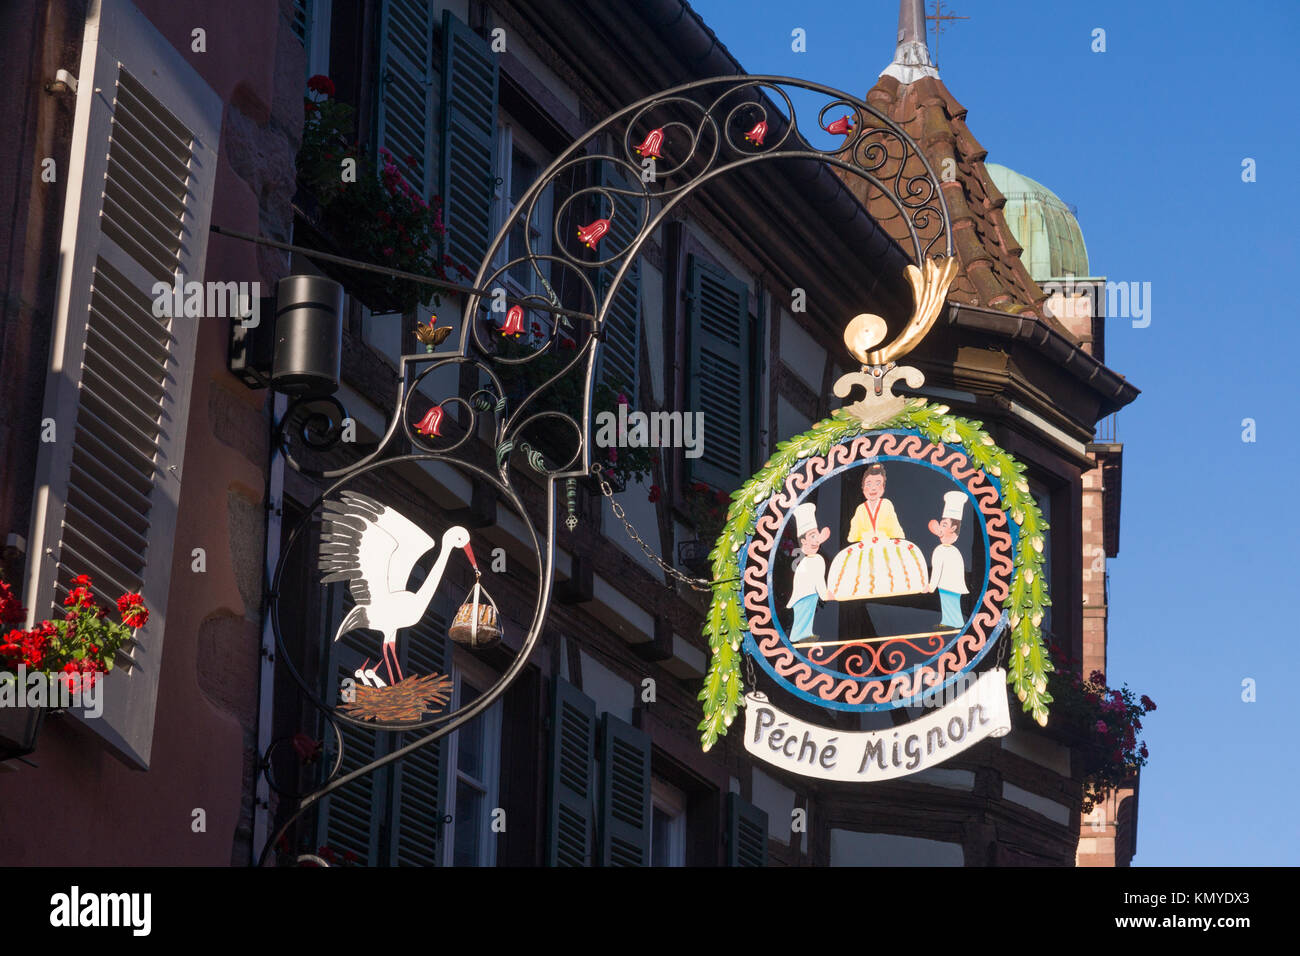 Hanging shop sign for a patisserie, 'Péché Mignon (sweet sins) in Kayserberg, Alsace. The stork kougelhopf are a regional symbols of Alsace Stock Photo